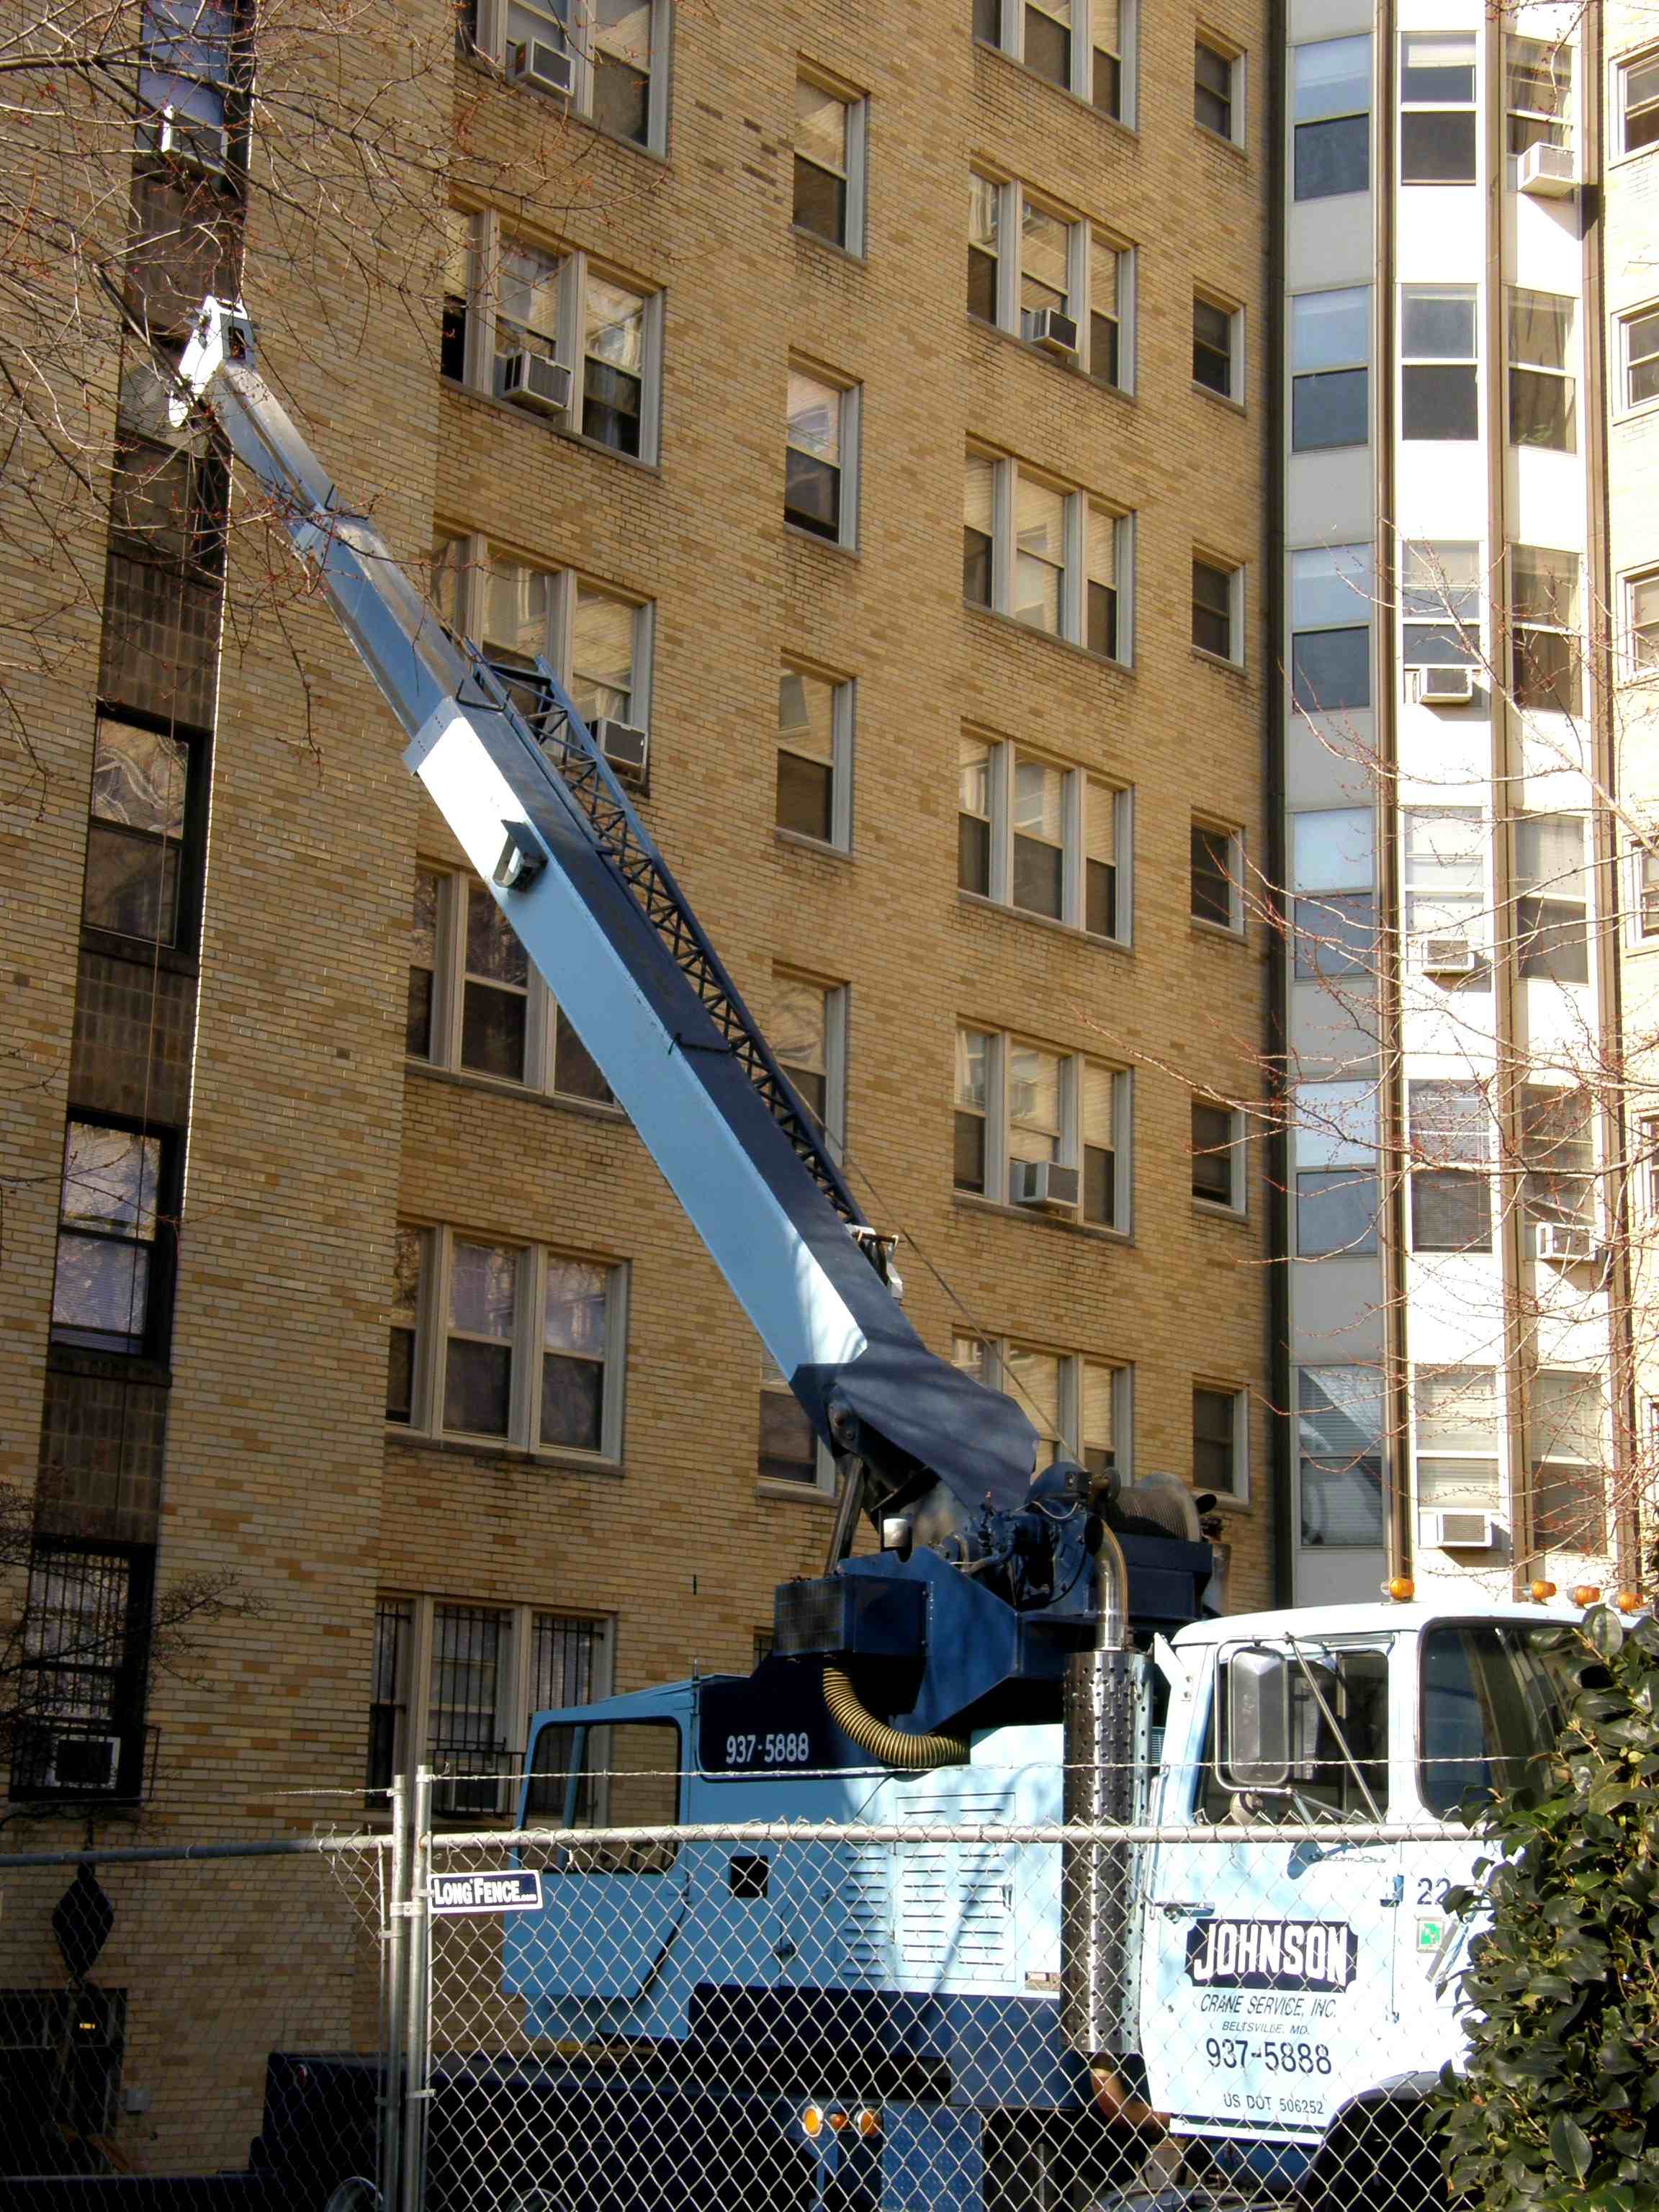 Cranes can tip over, damaging property, causing serious injuries, and sometimes claiming lives.